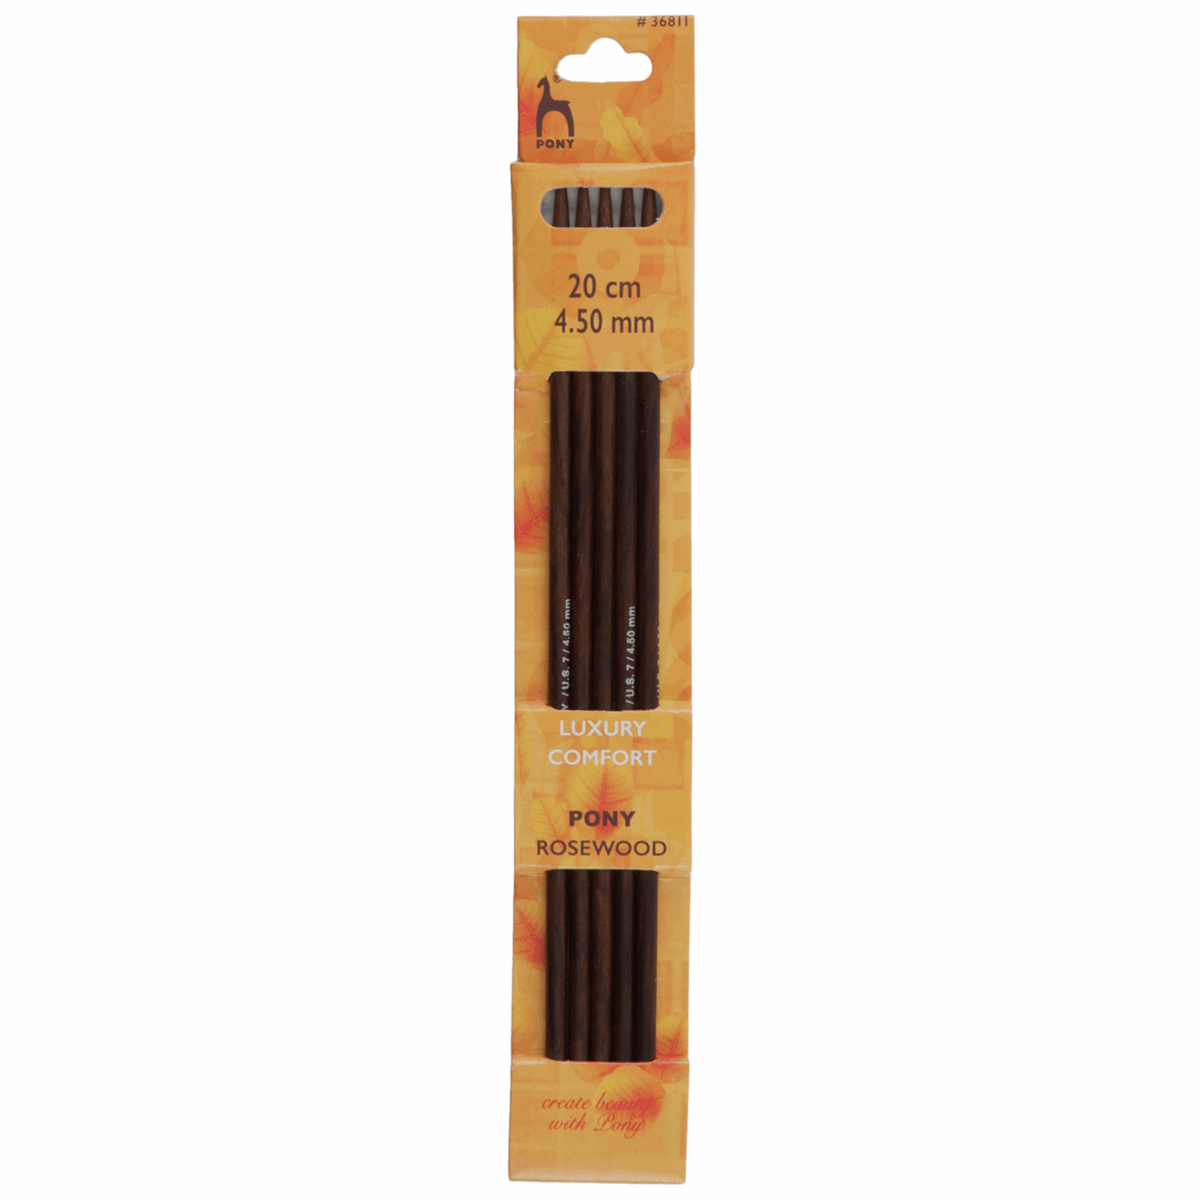 PONY 'Rosewood' Double-Ended Knitting Pins - 20cm x 4.50mm (Set of 5)